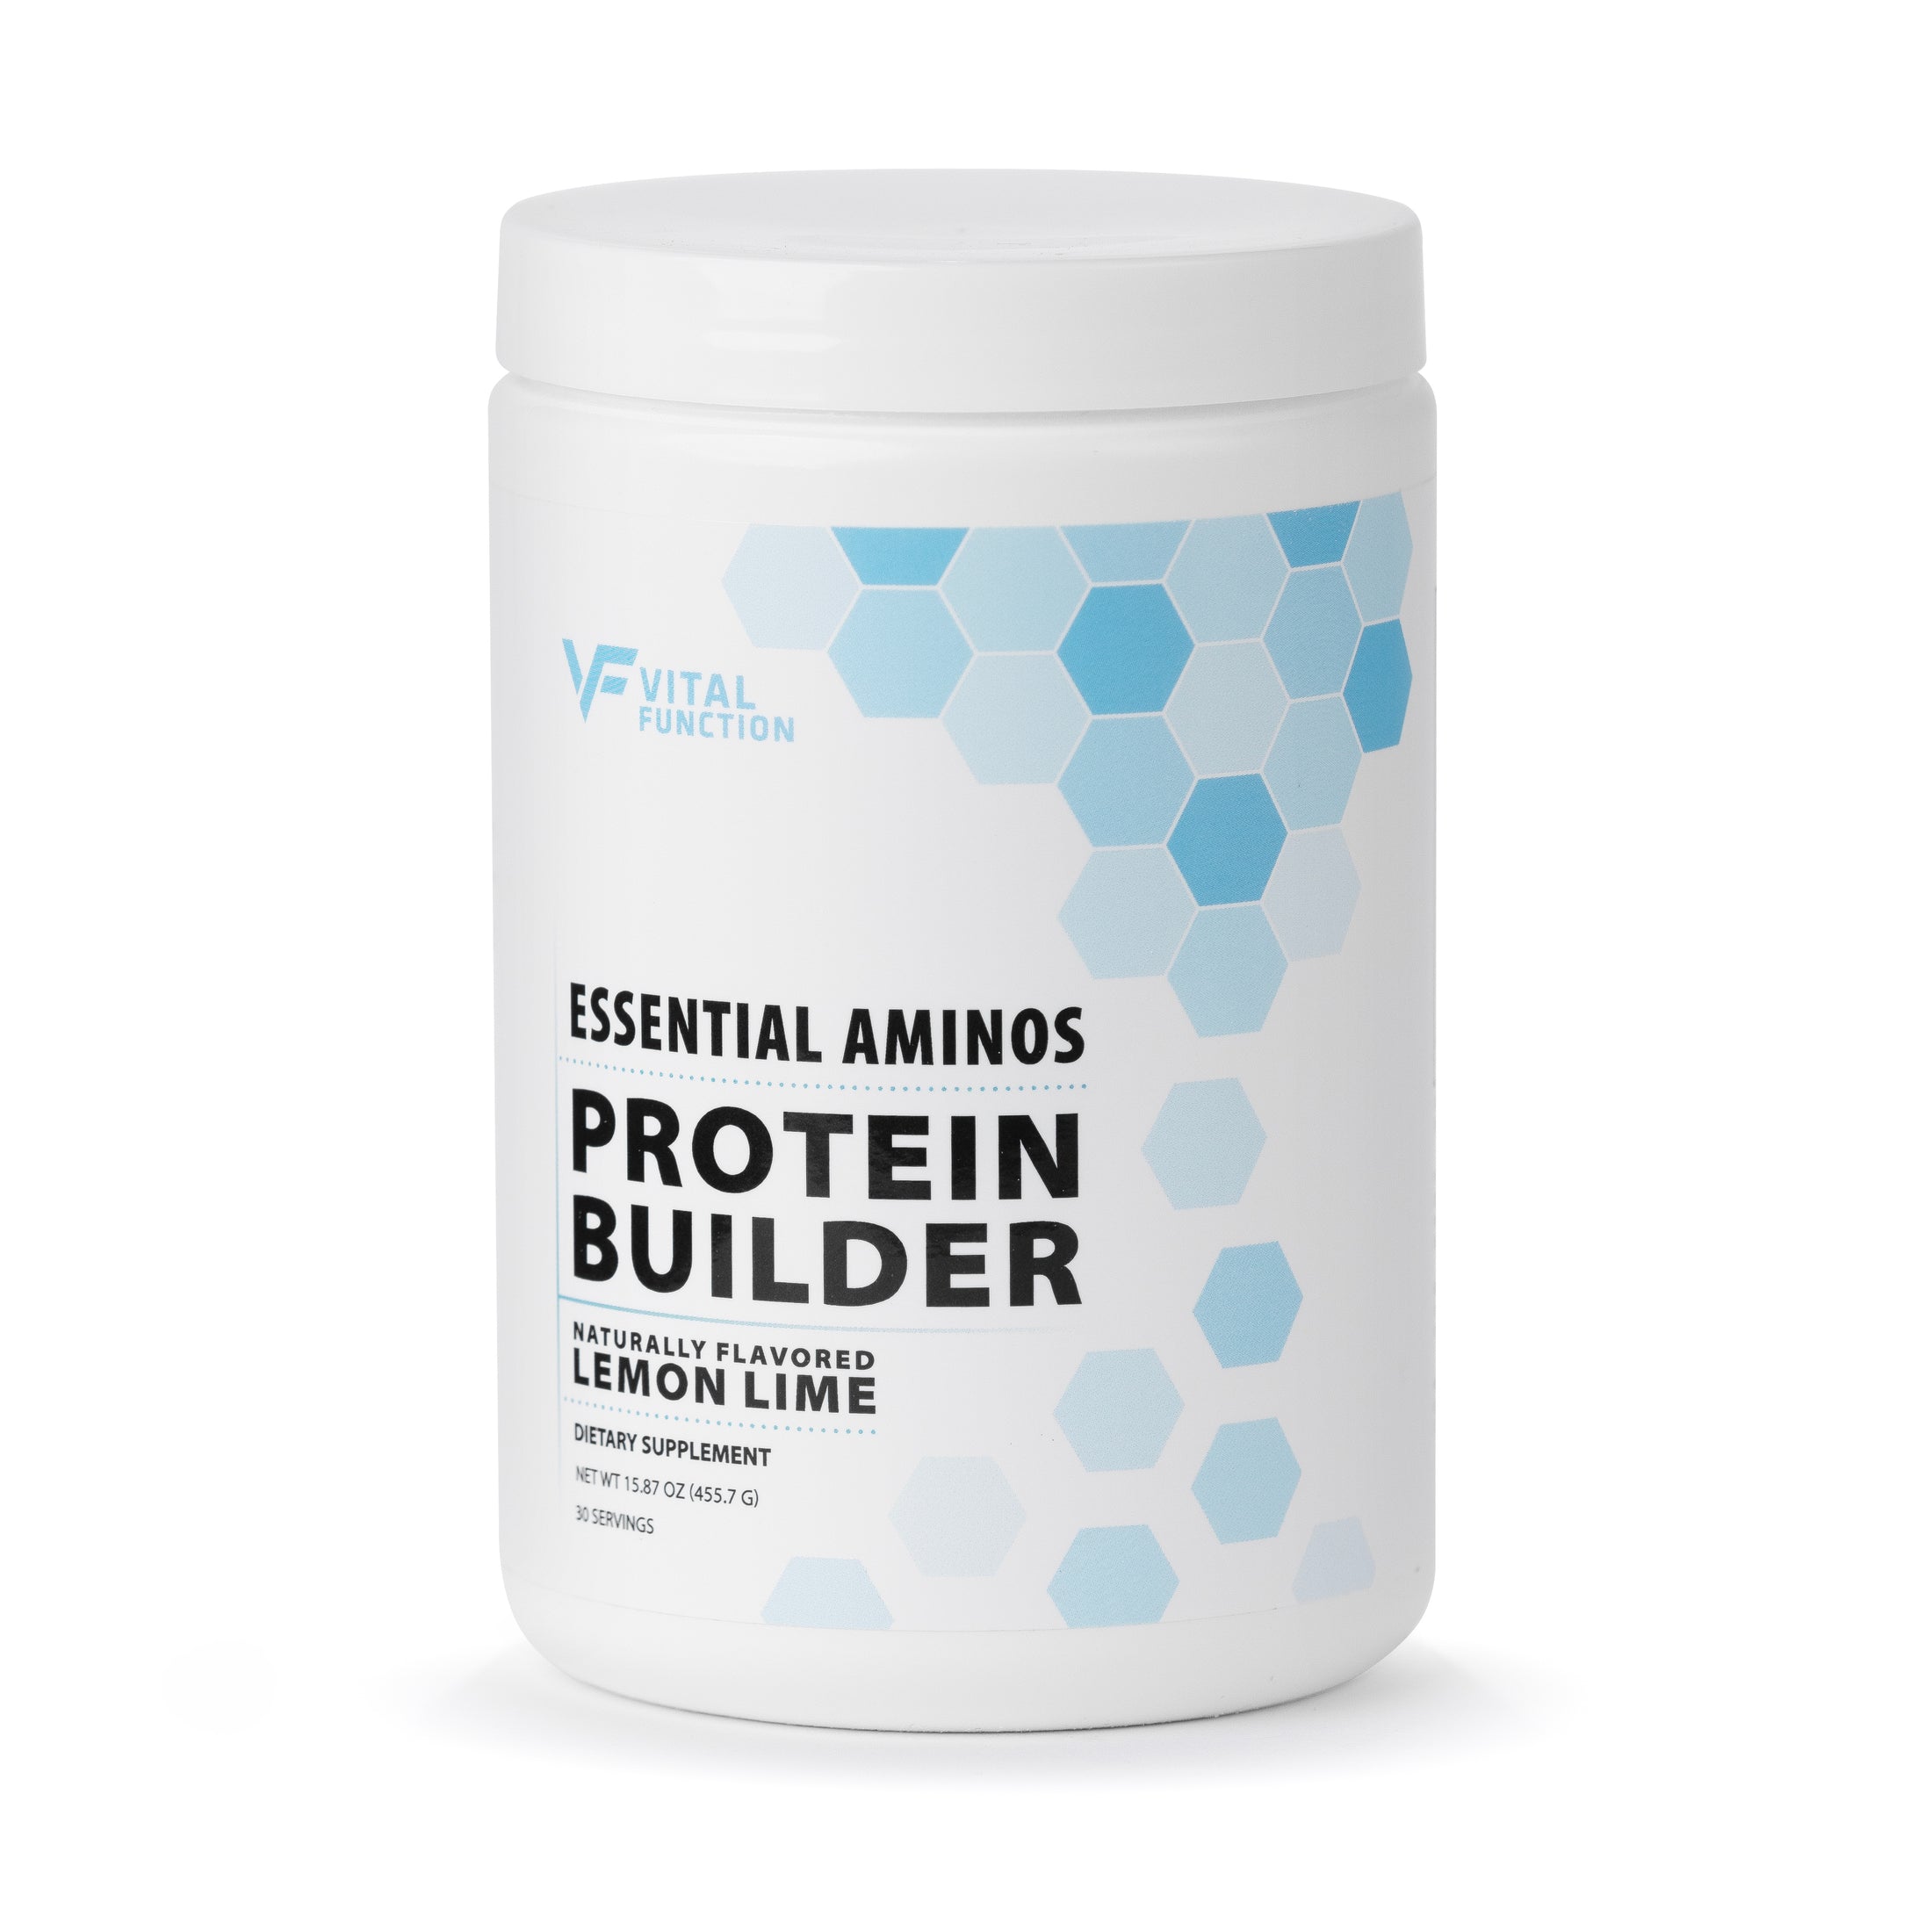 A tub of essential amino protein builder